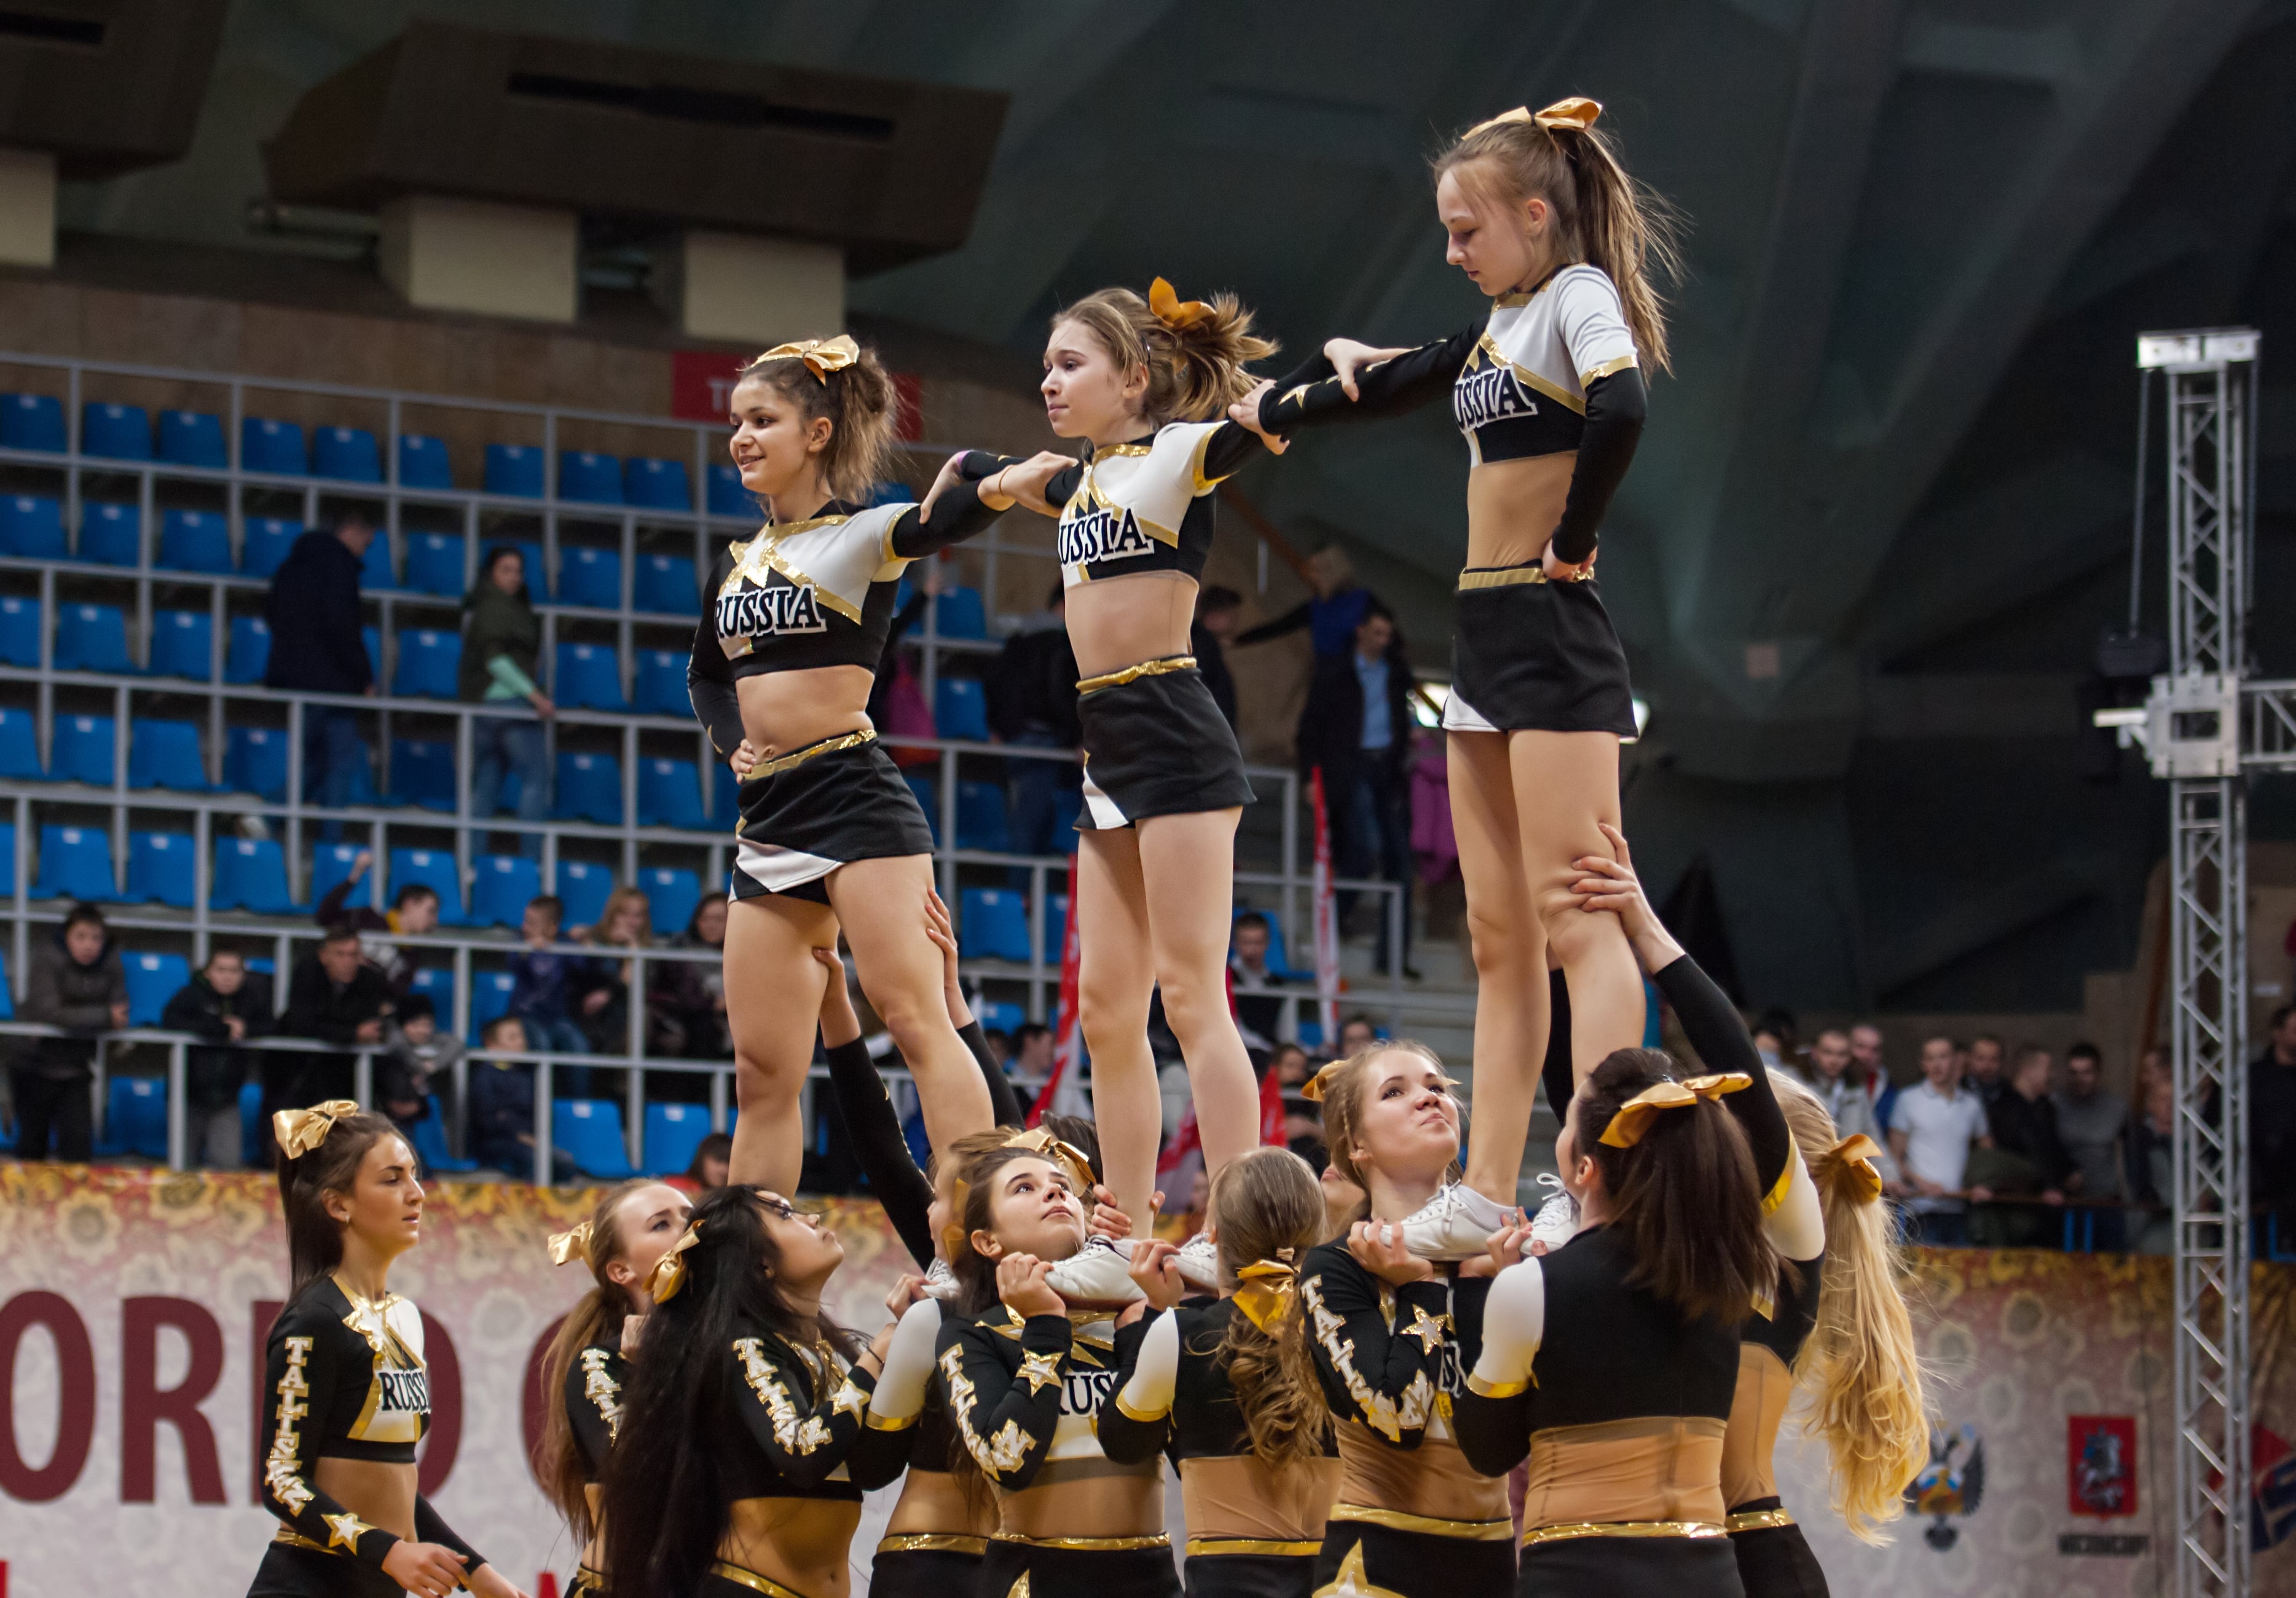 Competitive cheer team performing routine at a competition